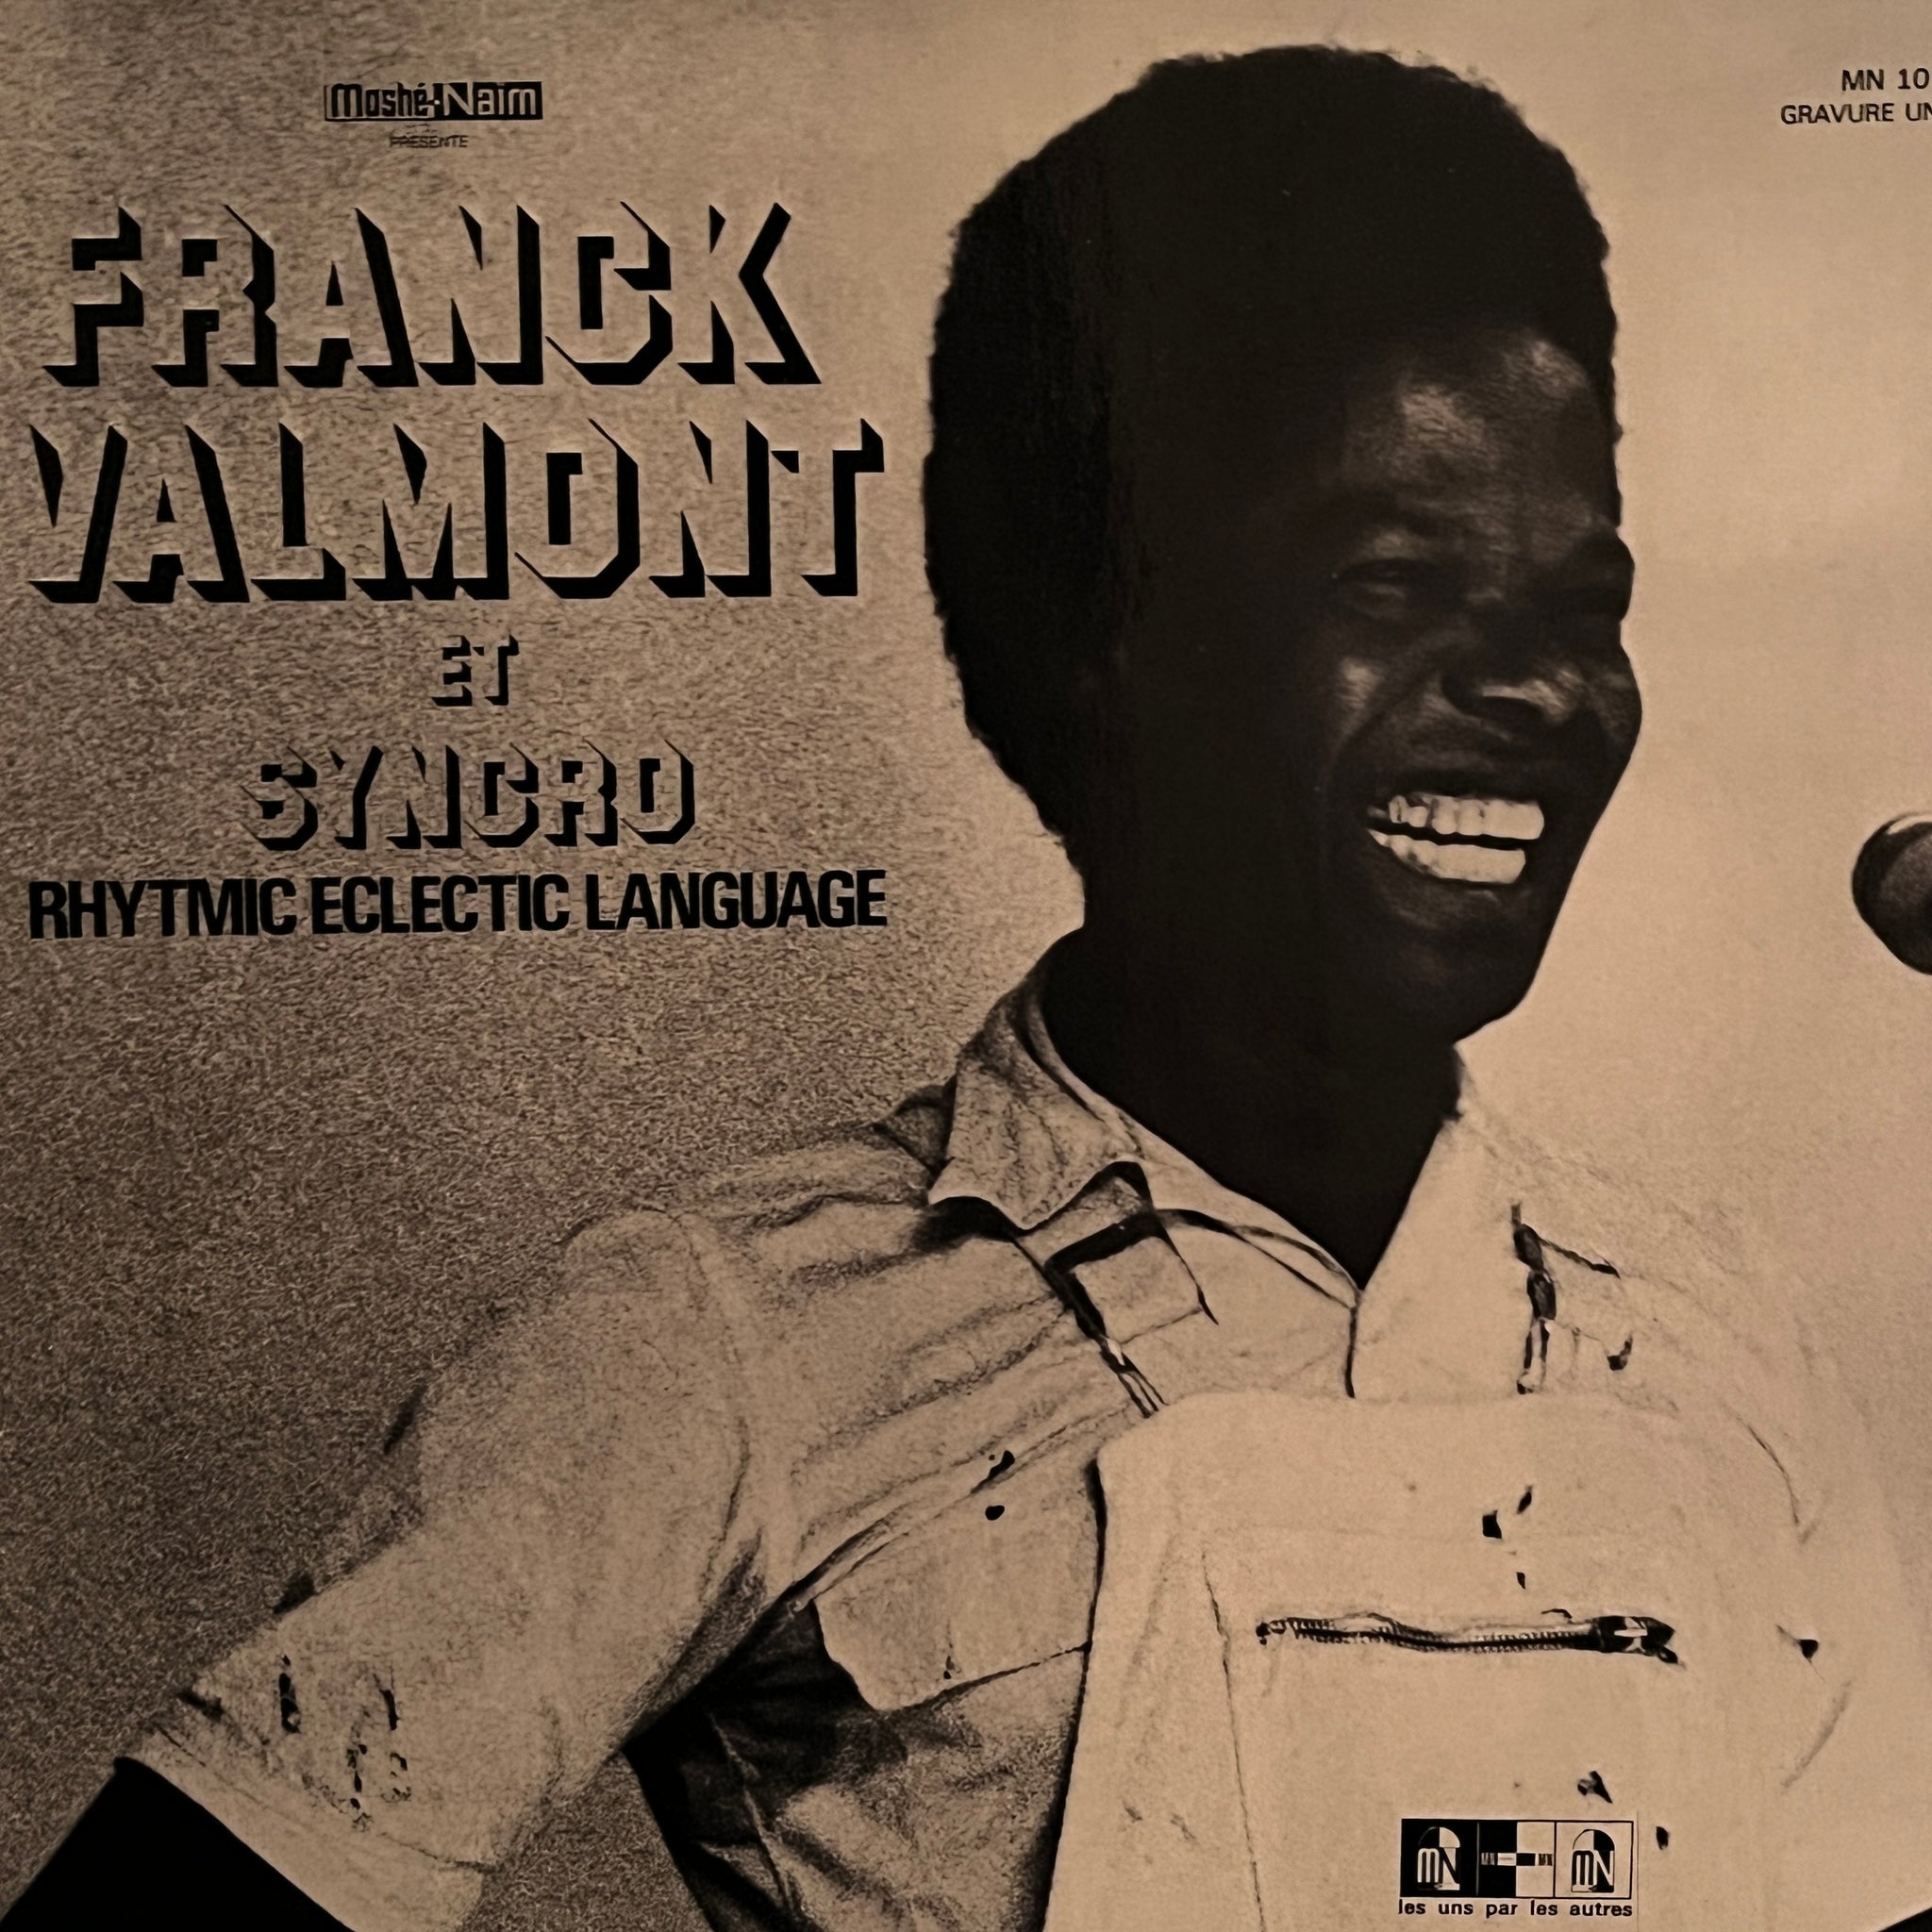 Franck Valmont Et Syncro Rhytmic Eclectic Language* – Franck Valmont Et Syncro Rhytmic Eclectic Language